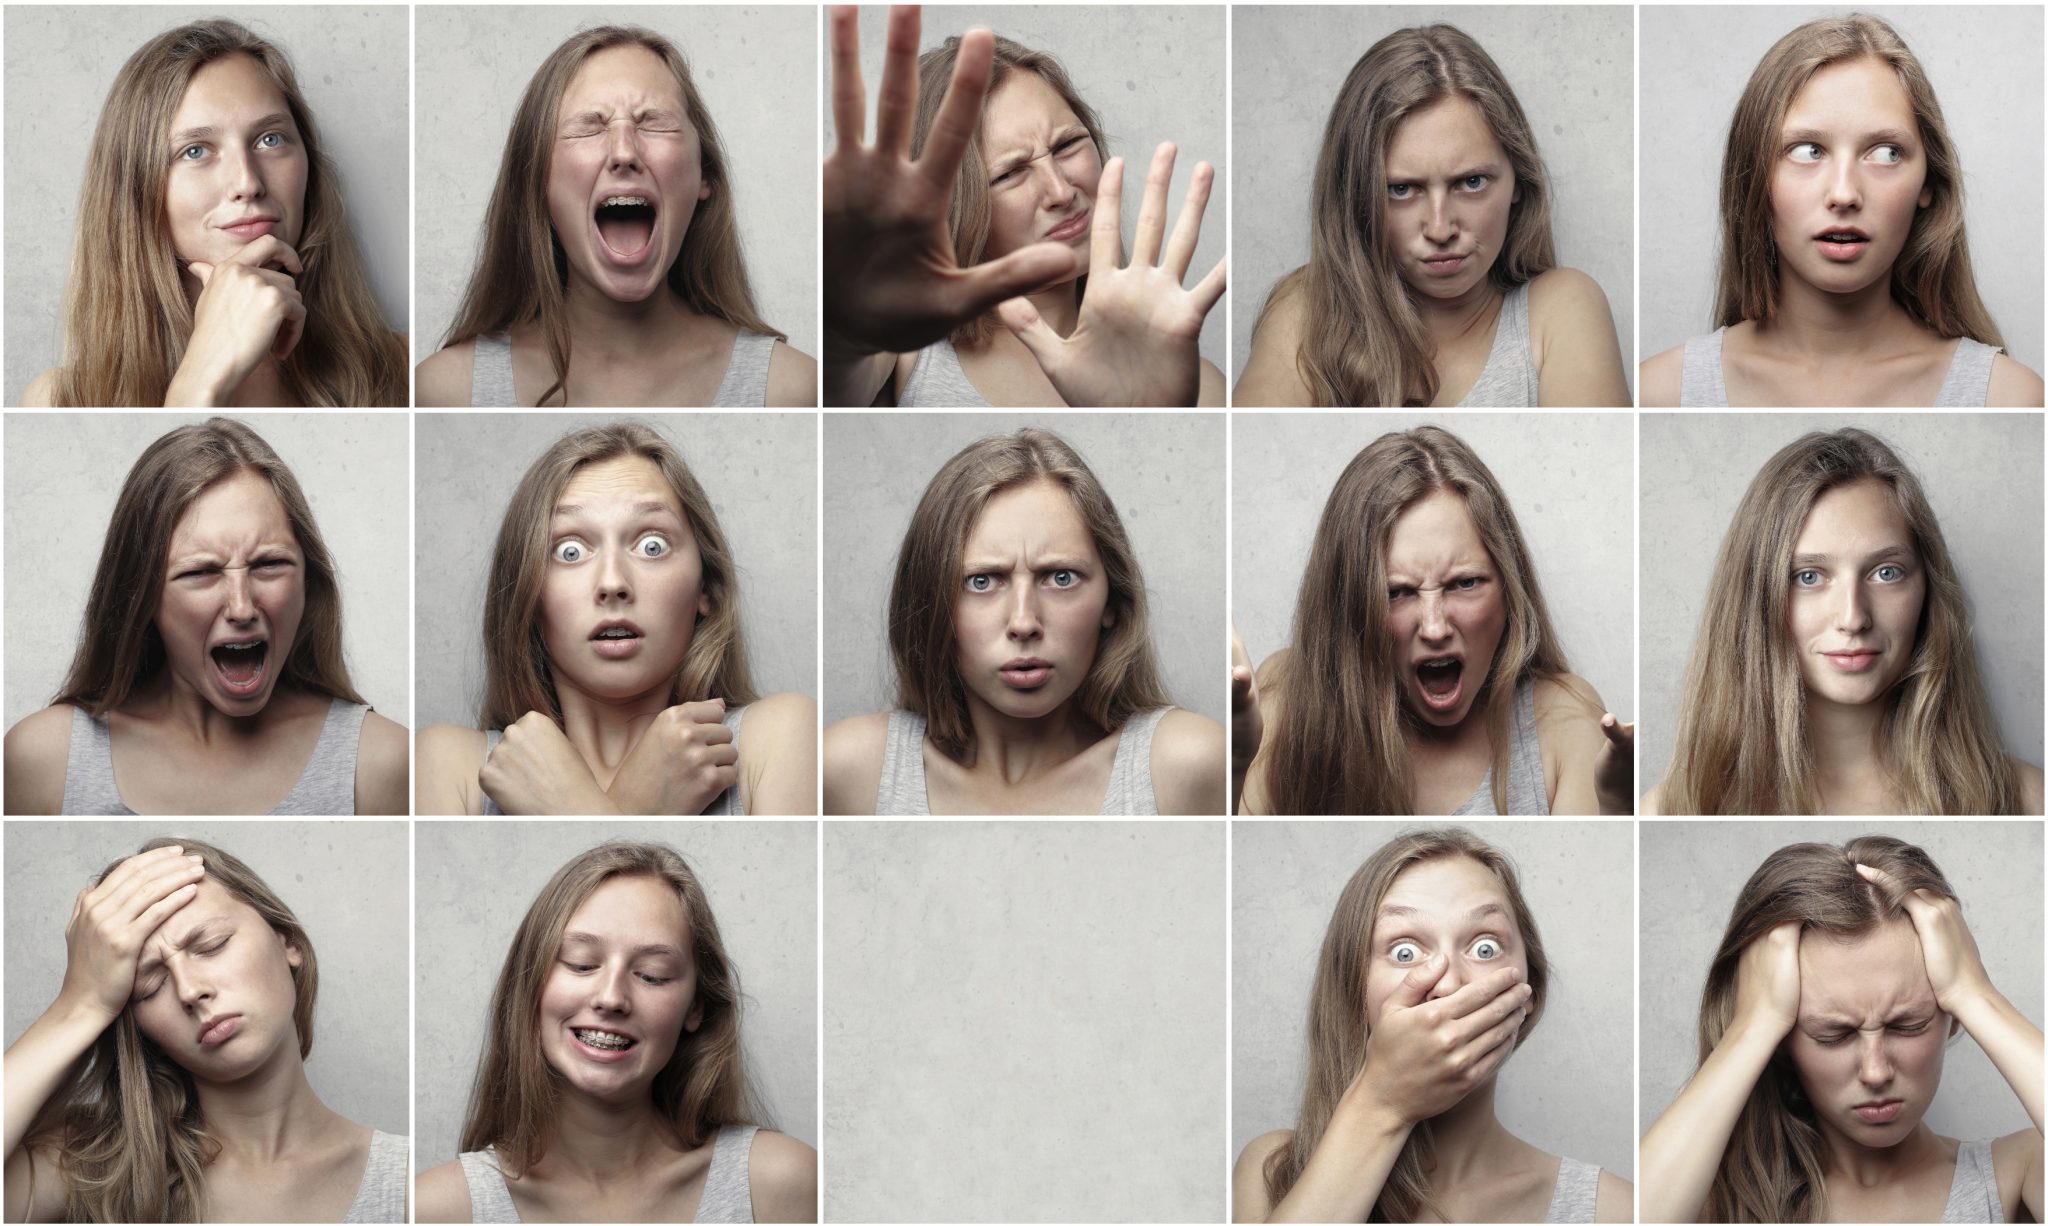 Collage of a woman's various facial reactions